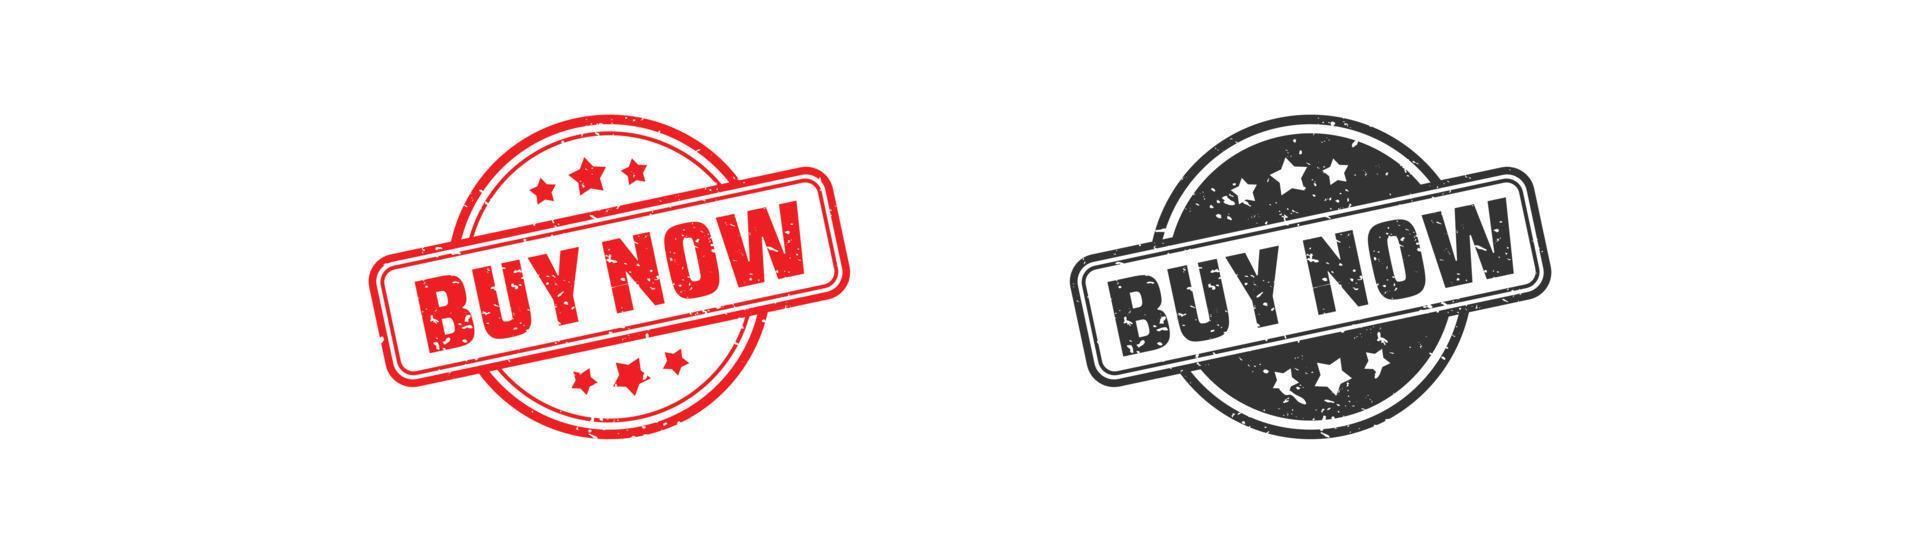 BUY NOW stamp rubber with grunge style on white background vector